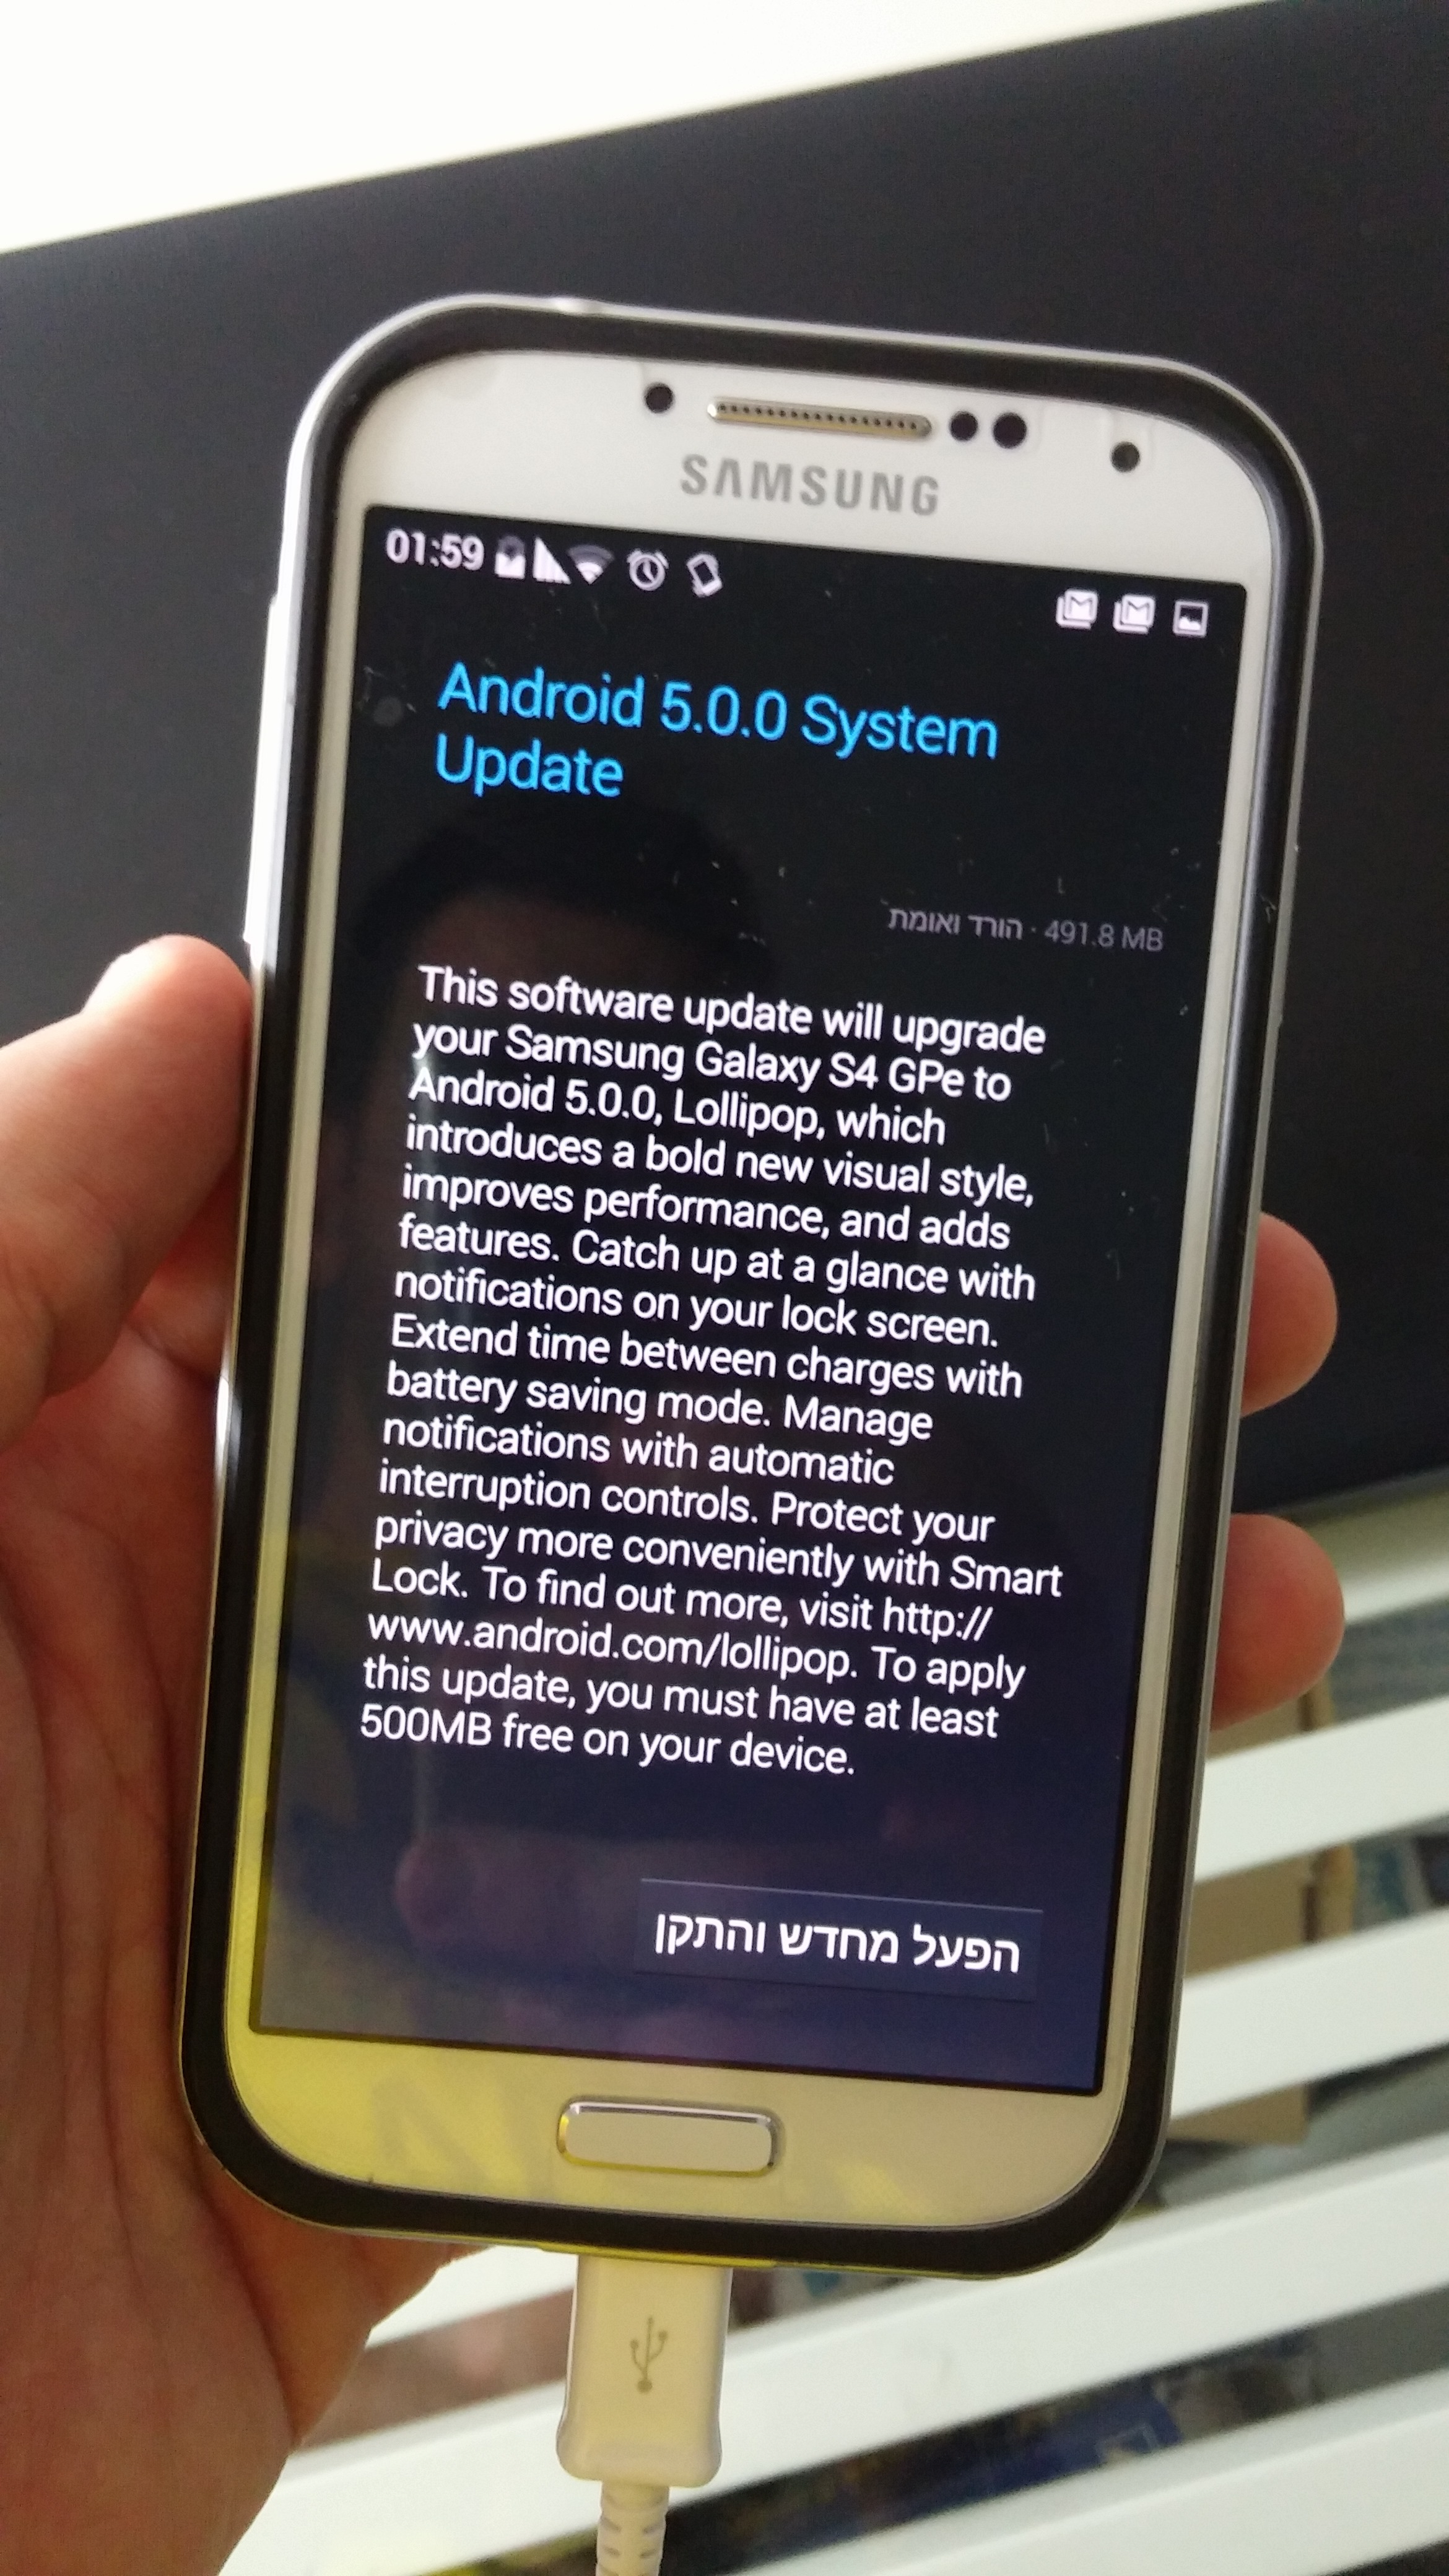 Galaxy S4 GPe is getting the Android 5.0 Lollipop OTA update